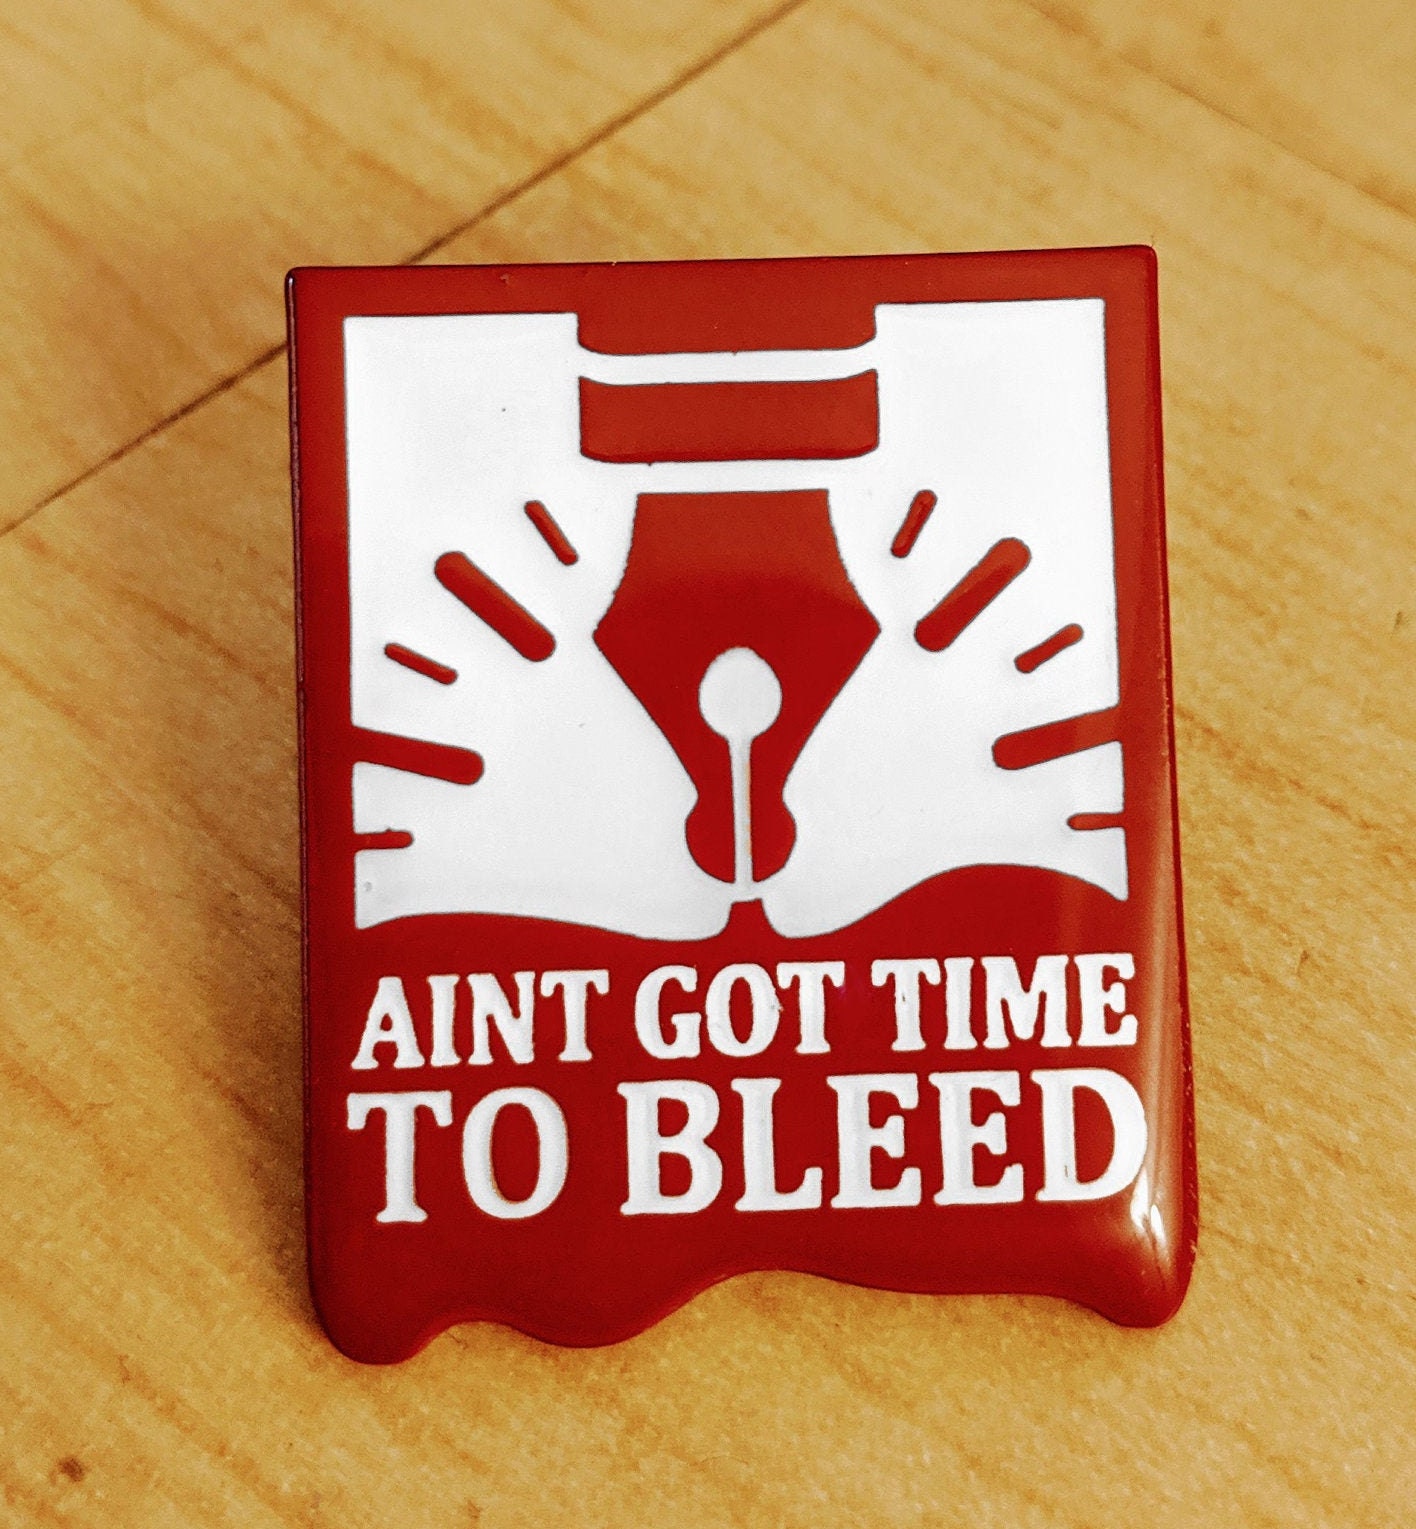 I Ain't Got Time To Bleed - I Aint Got Time To Bleed - Pin